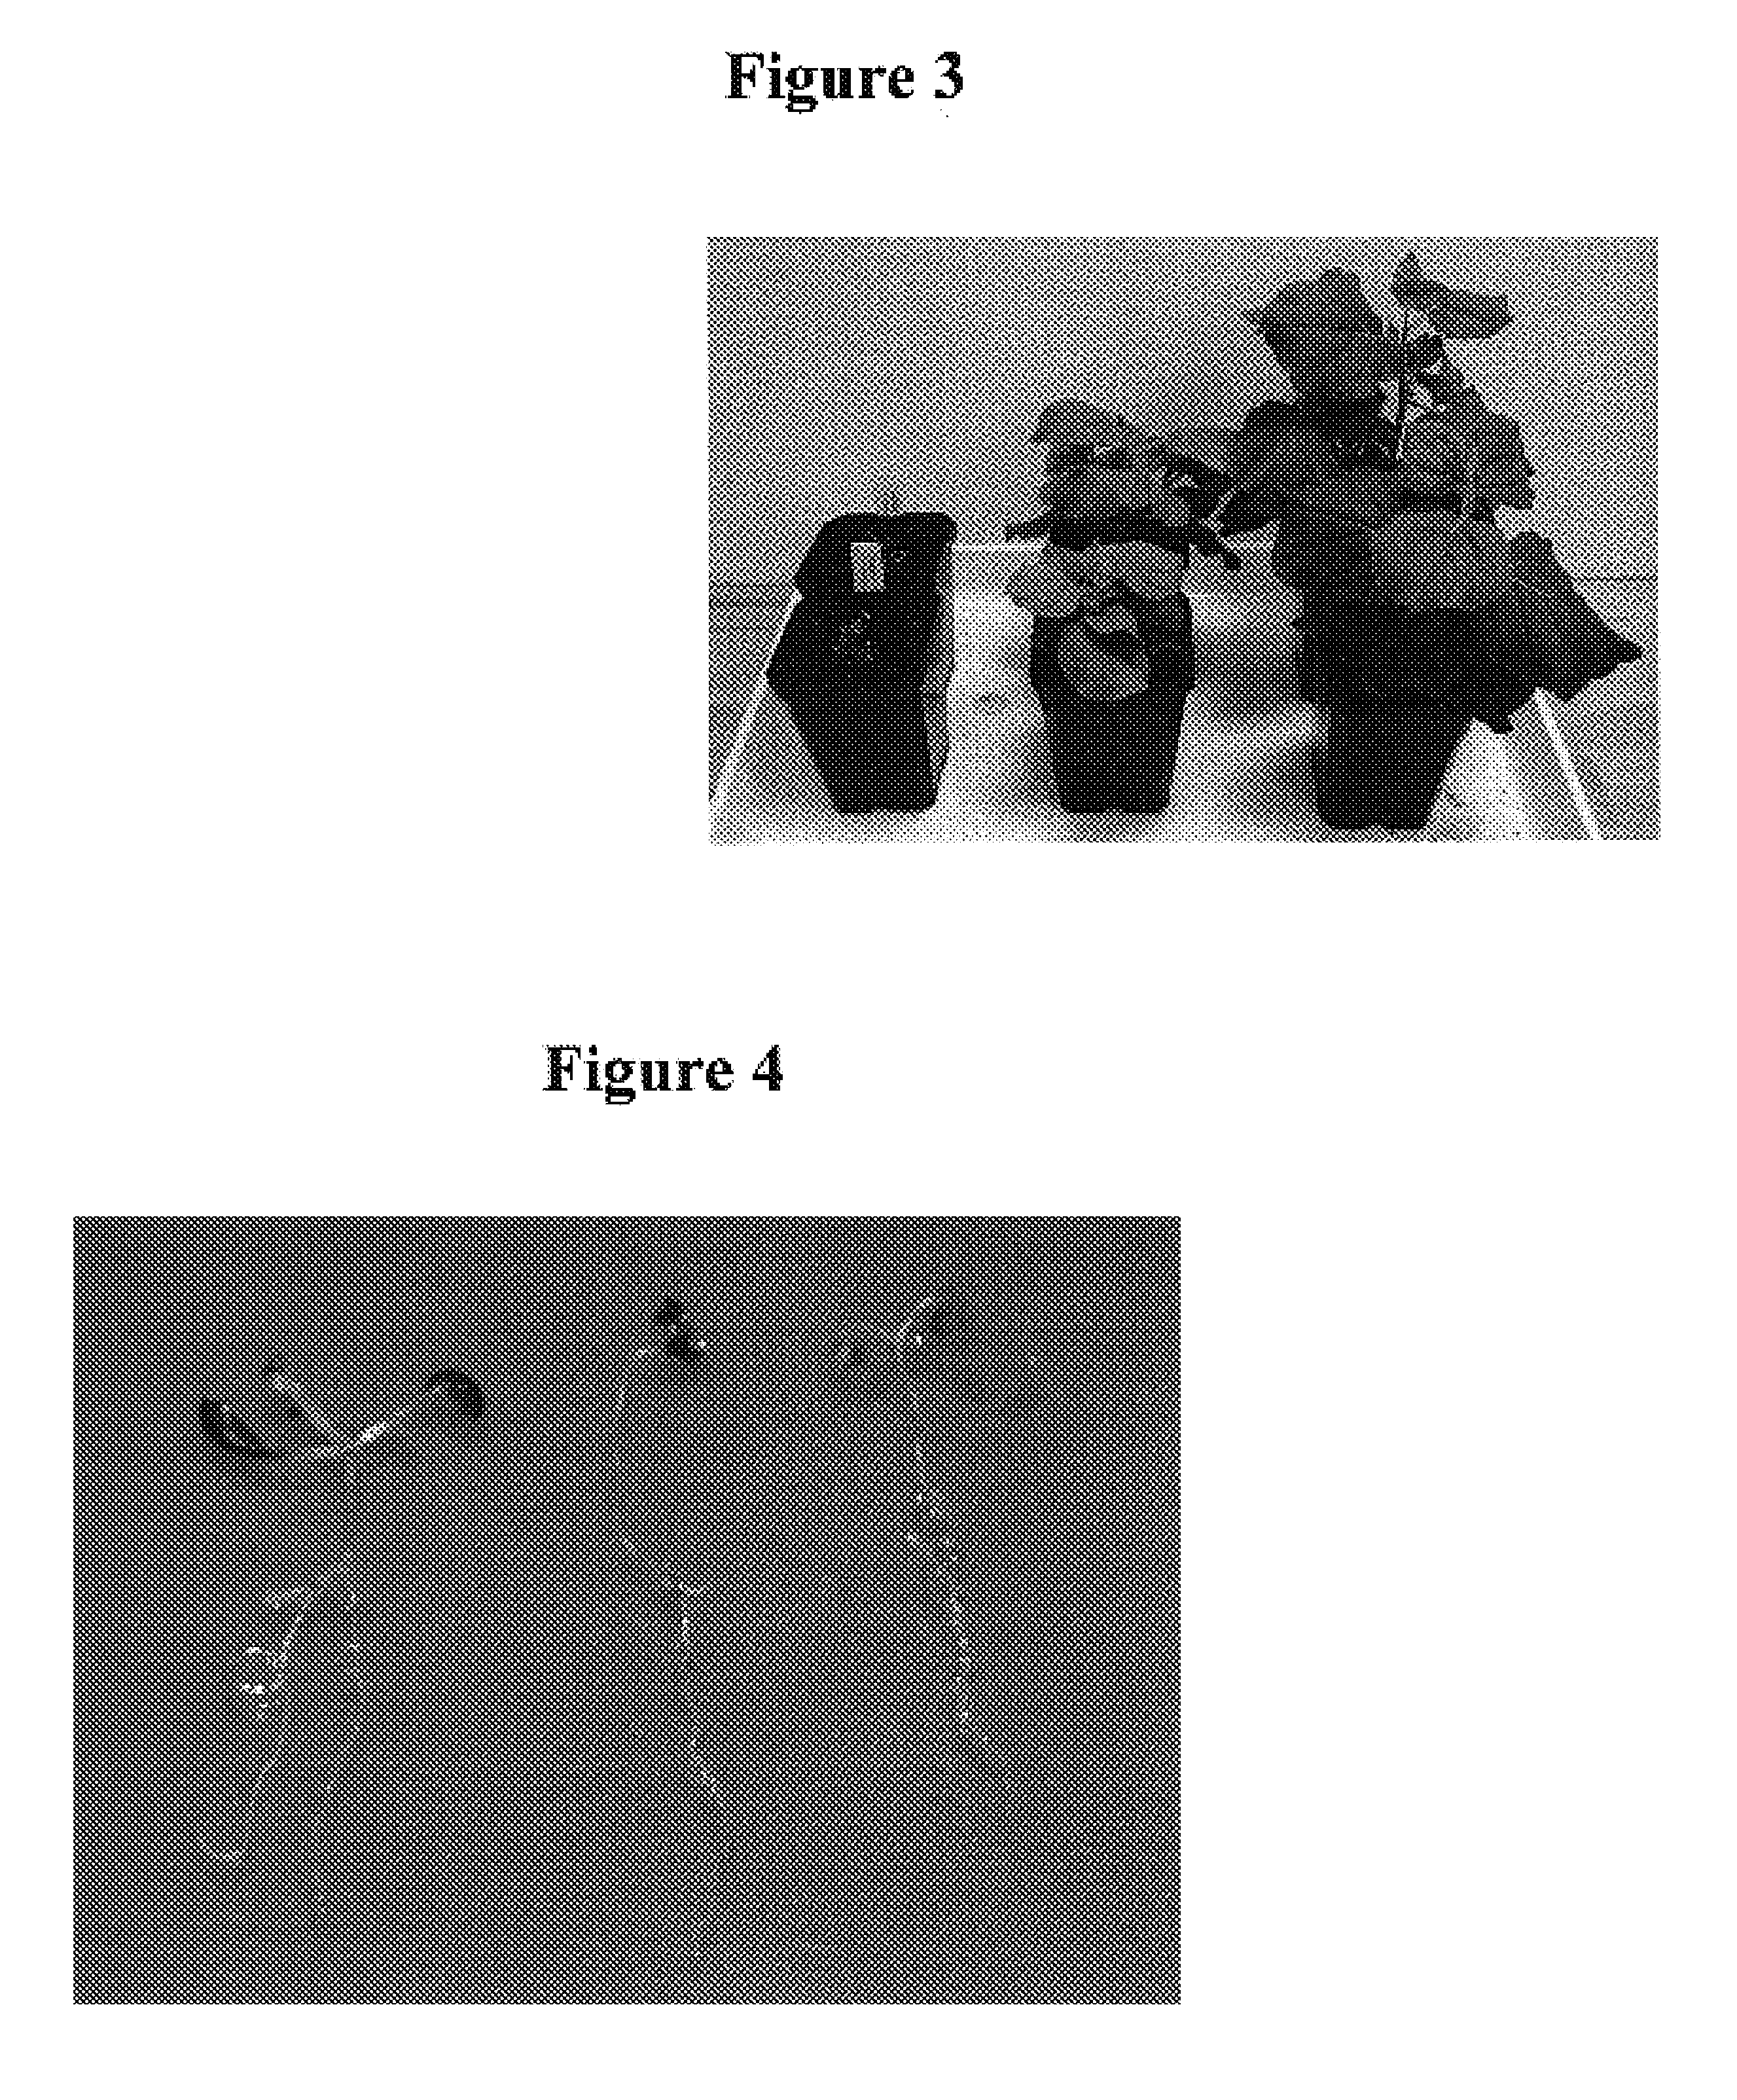 Methods for modulating plant growth and biomass